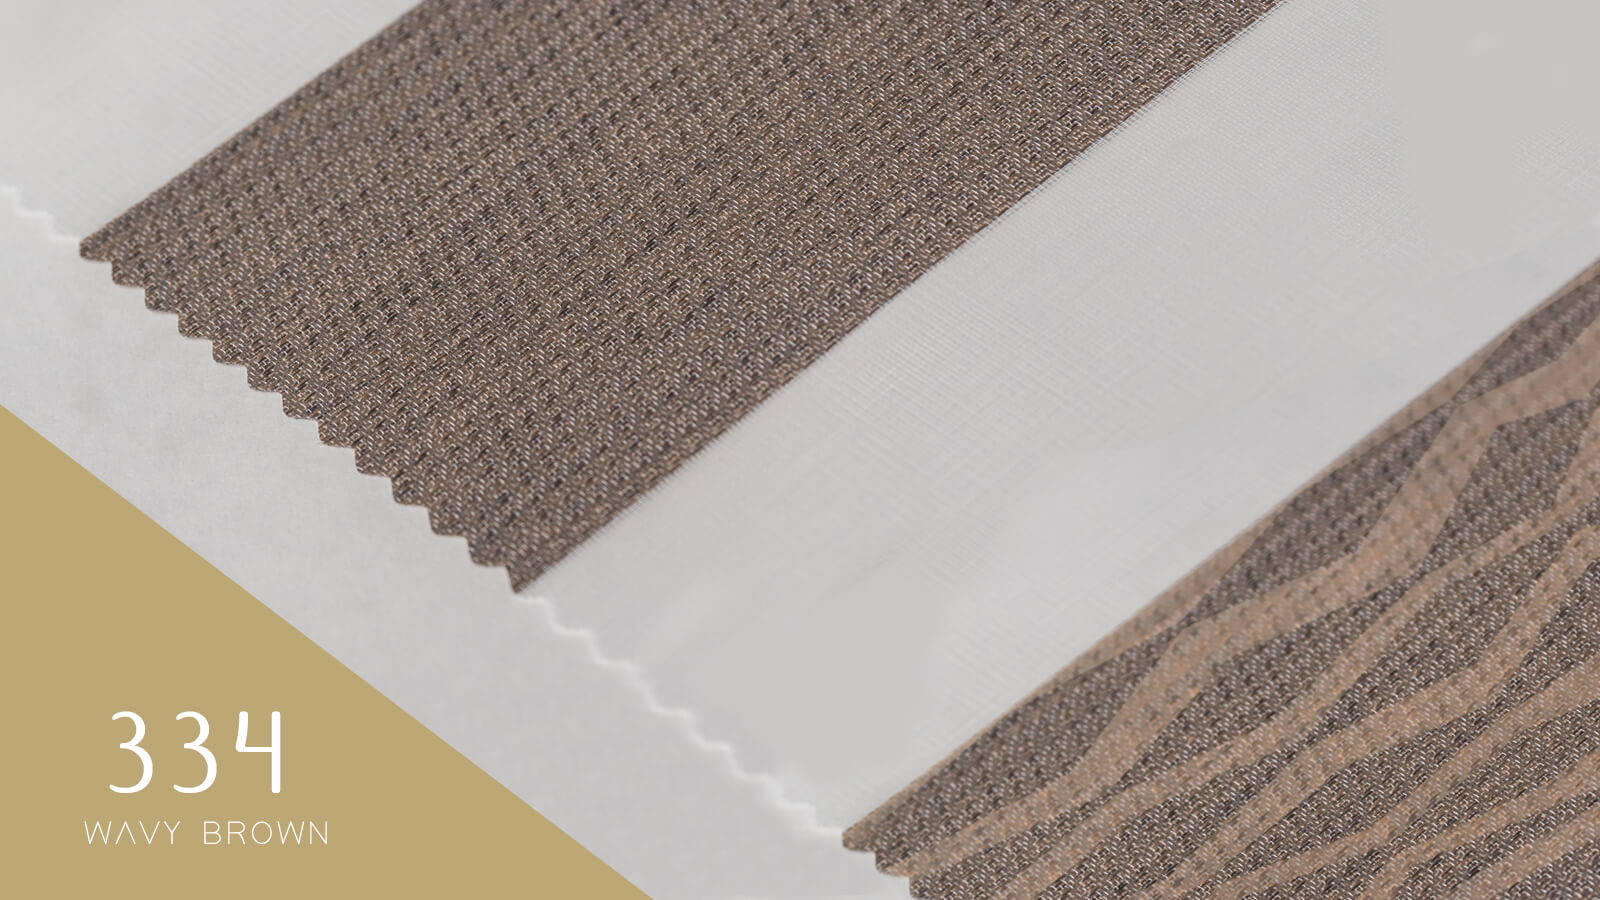 Decor Blinds Privacy 334 Wavy Brown